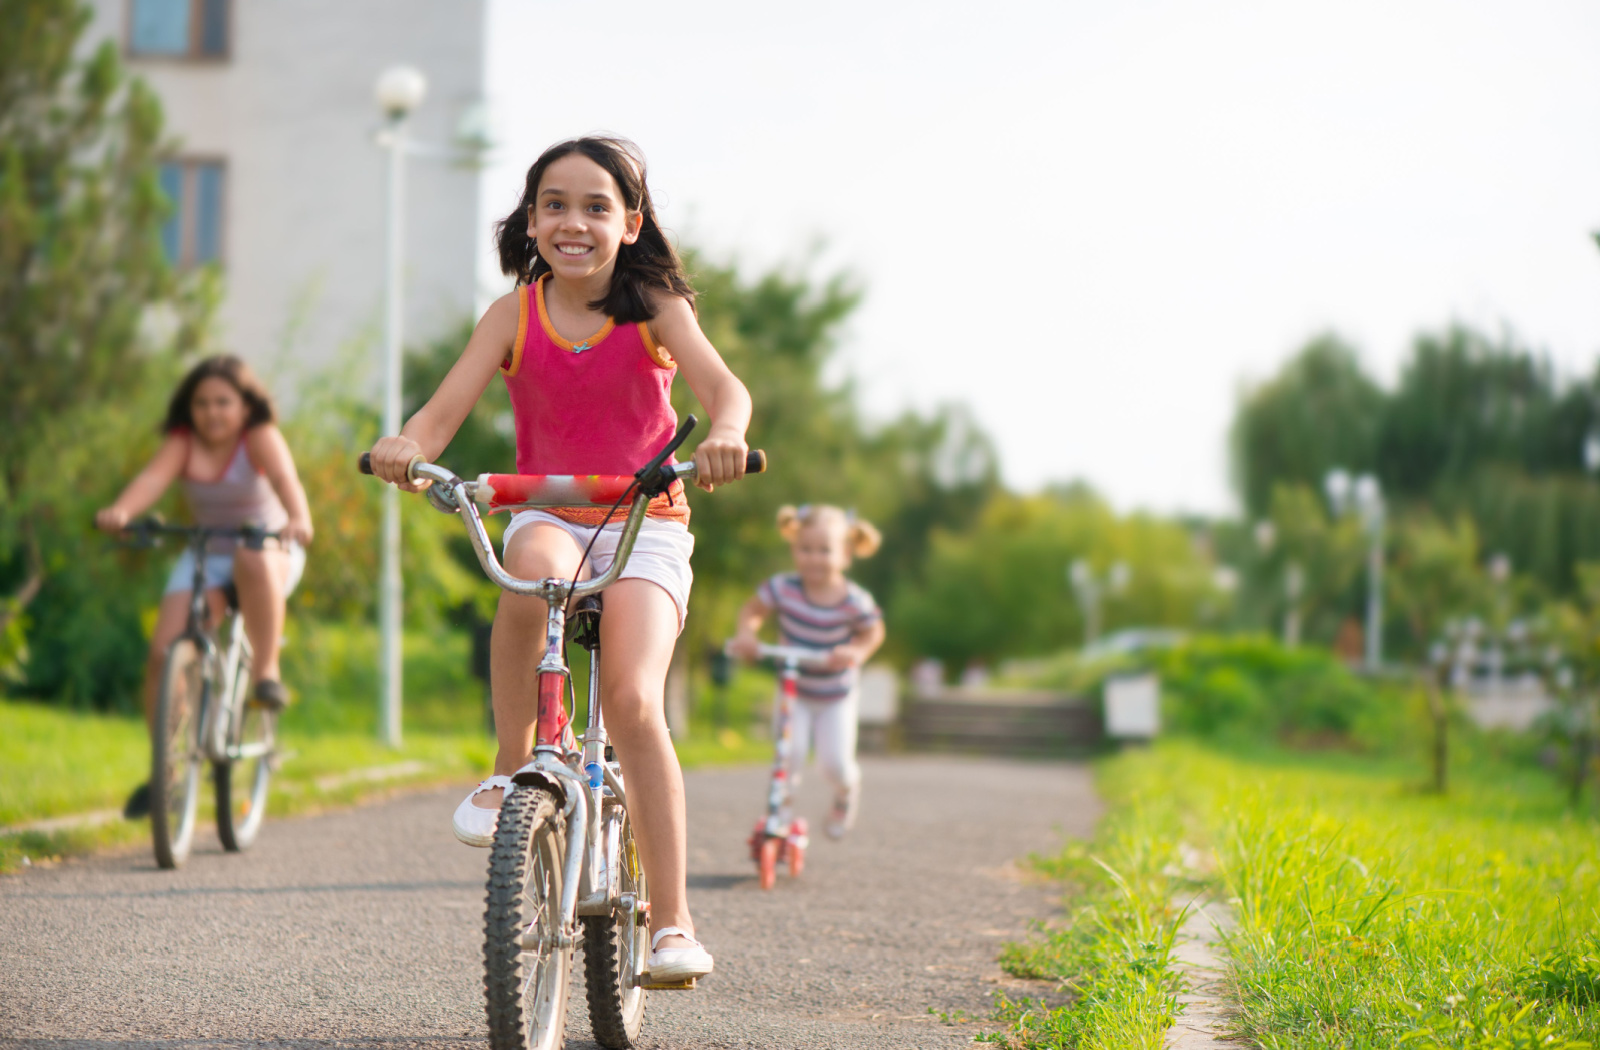 3 young girls smiling and riding their bikes in a park on a warm day.
